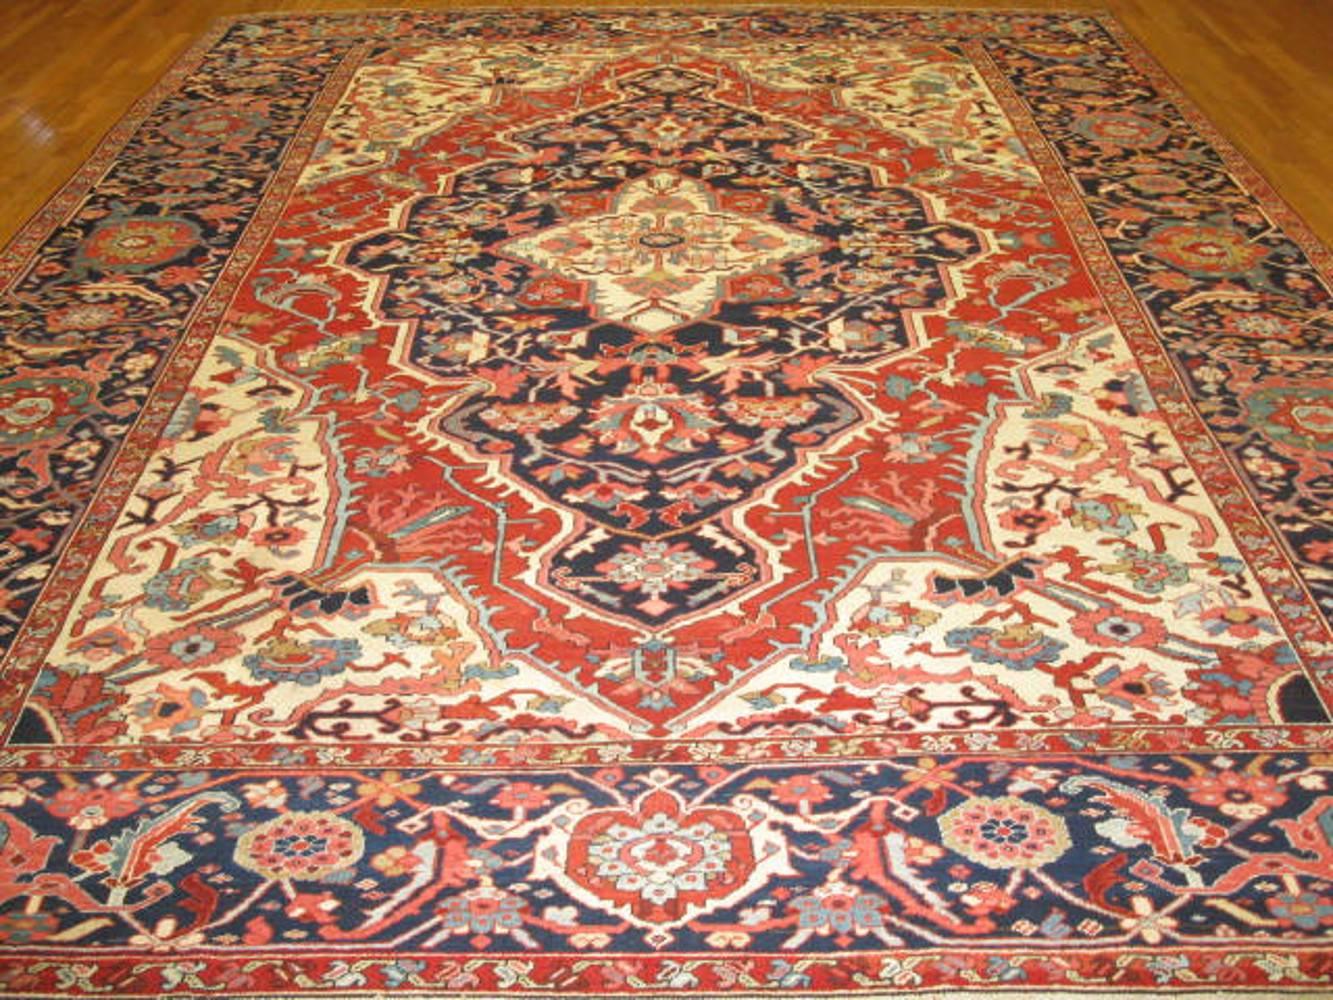 This is a fantastic hand-knotted antique Persian Serapi rug with the Classic geometric central and corner medallion design. The rug is finely handmade with wool nas natural dyes. It measures 10' 6'' x 13' 3.